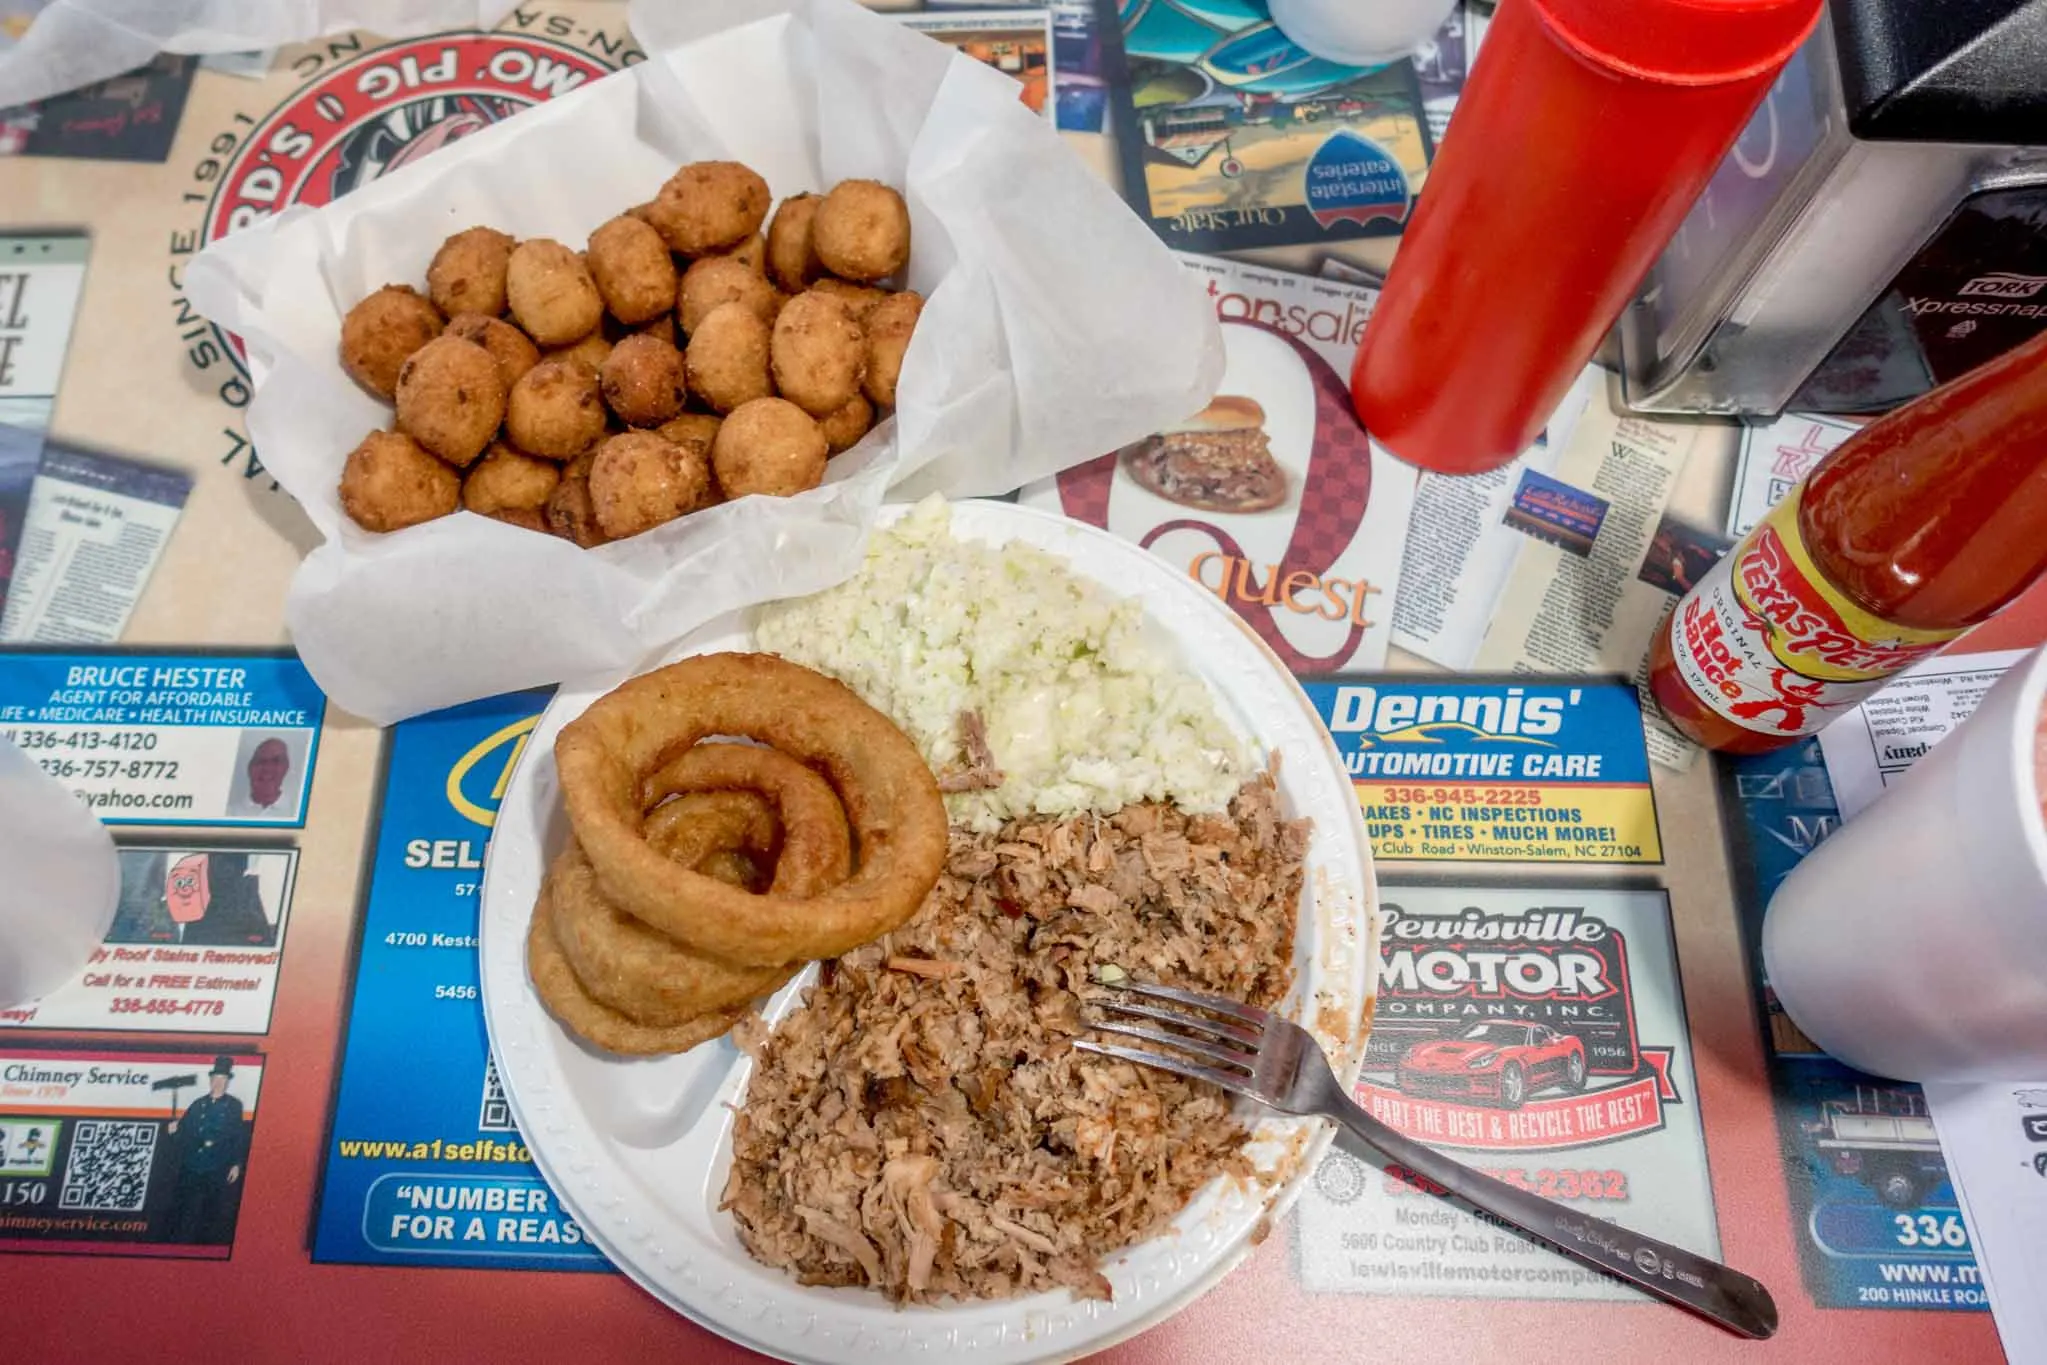 Plate of chopped barbecue, onion rings, and hush puppies on a table covered with colorful advertisements